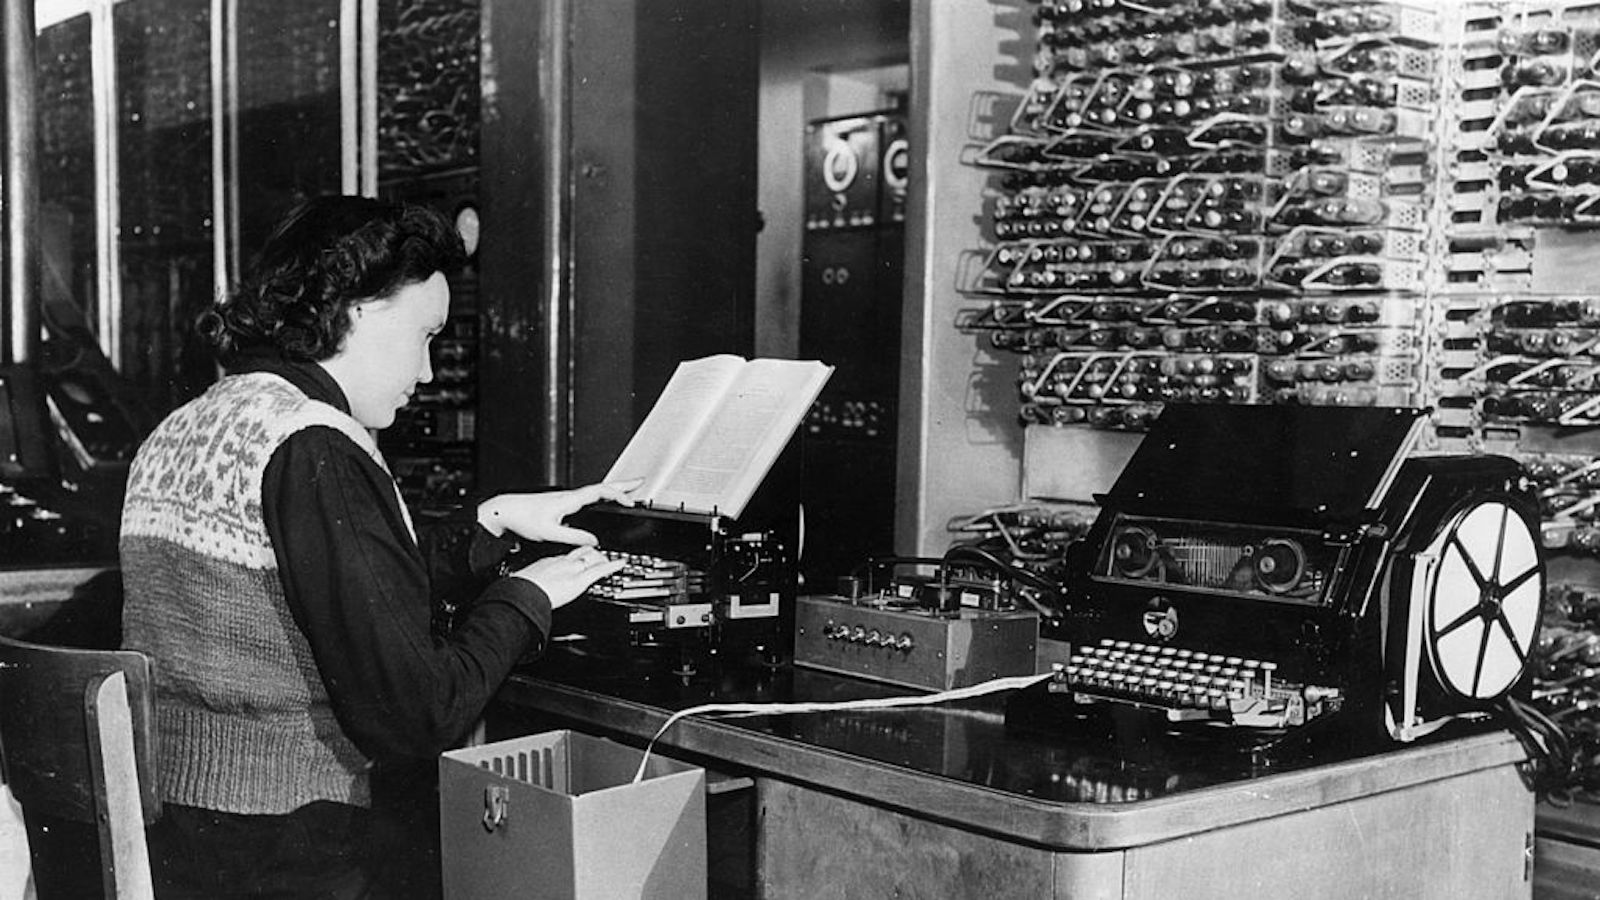 Woman typing at an old computer